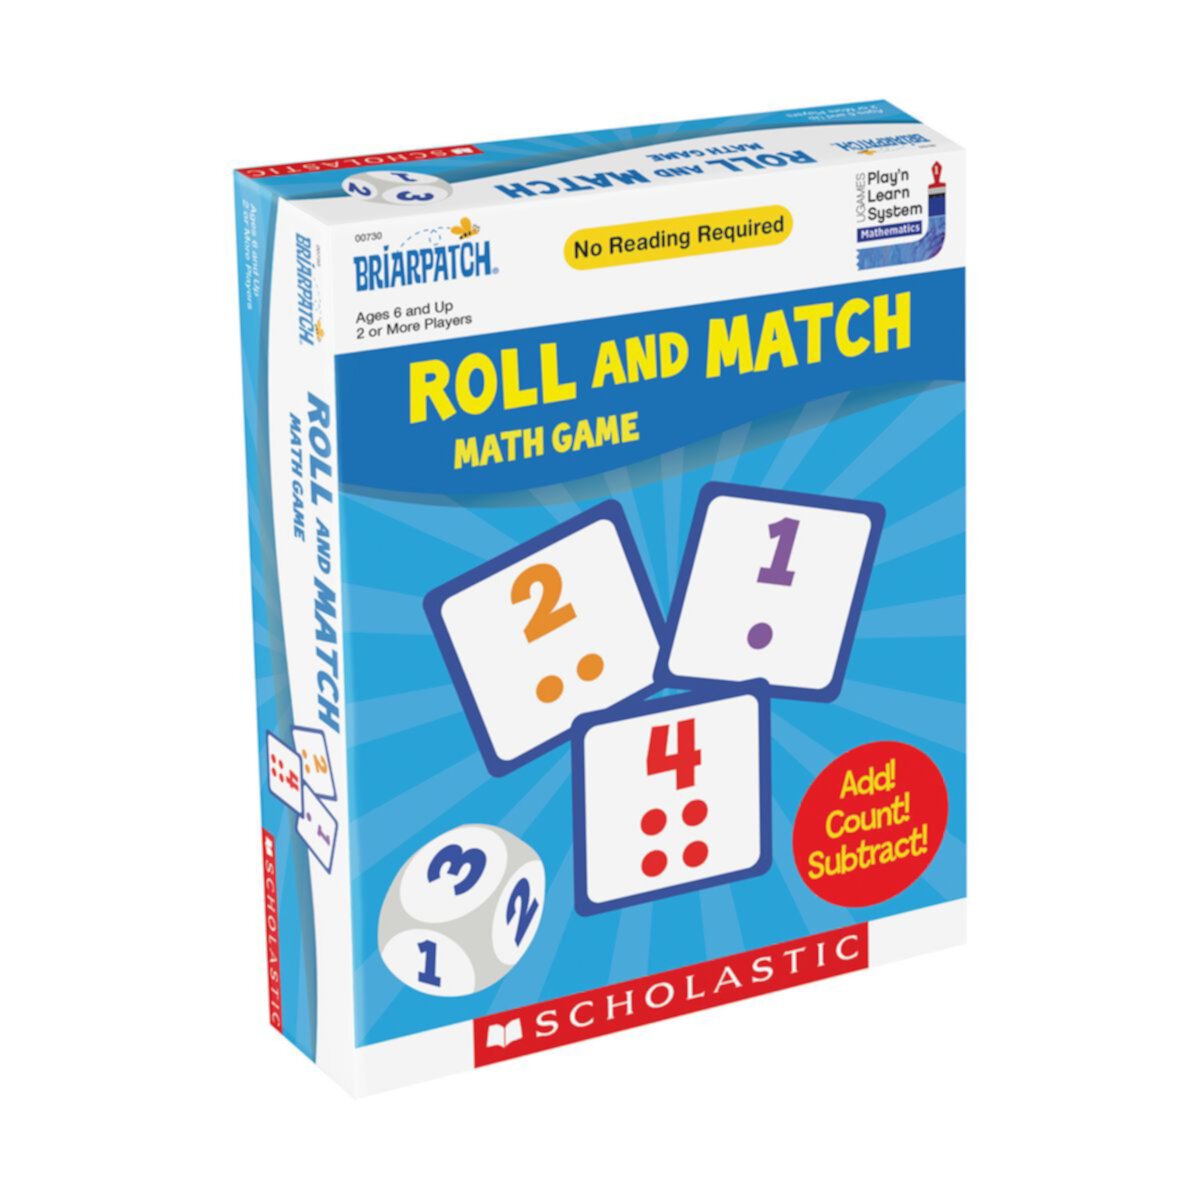 Briarpatch Scholastic Roll and Match Math Game Briarpatch